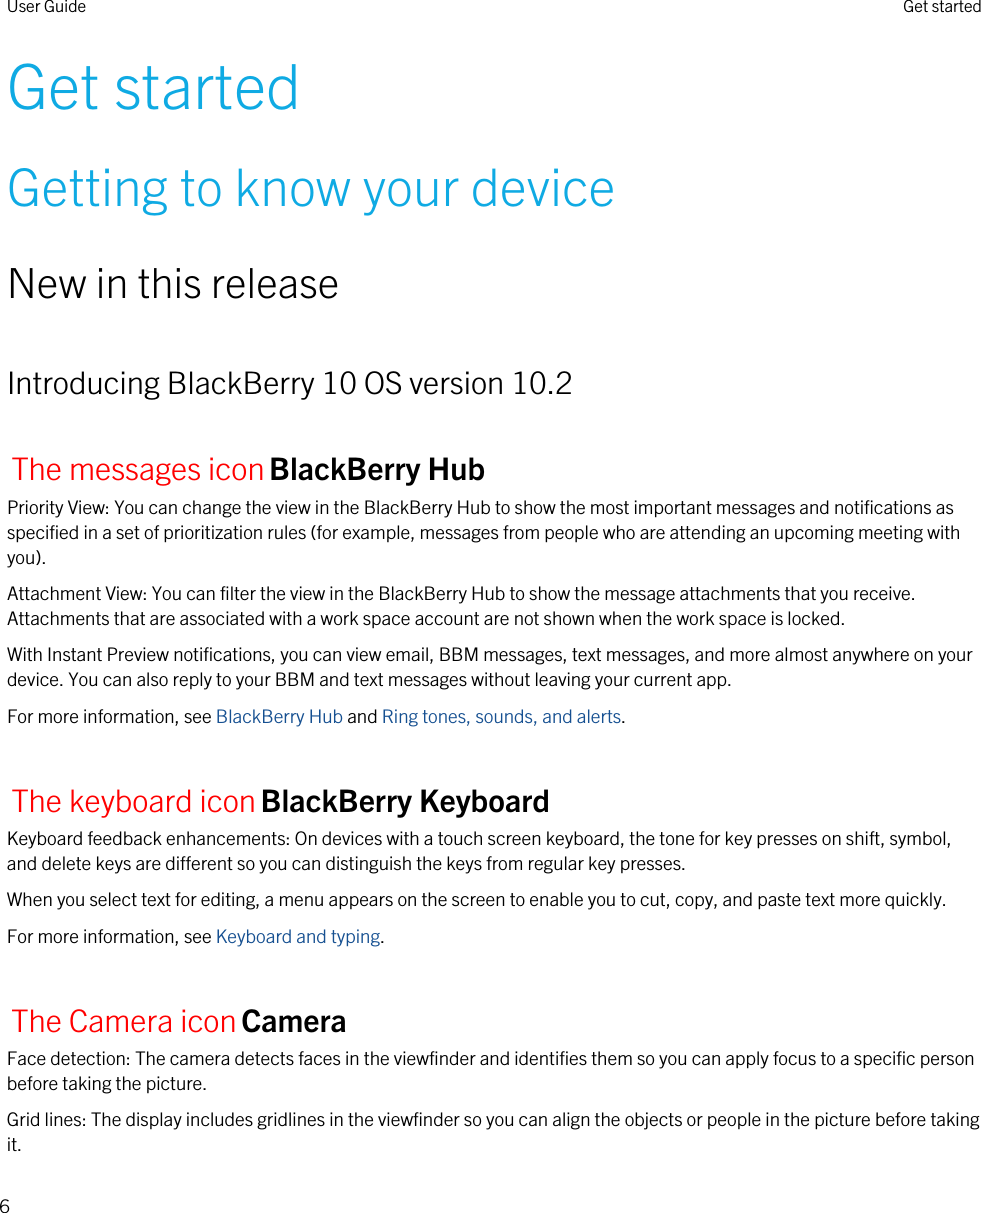 Get startedGetting to know your deviceNew in this releaseIntroducing BlackBerry 10 OS version 10.2The messages iconBlackBerry HubPriority View: You can change the view in the BlackBerry Hub to show the most important messages and notifications as specified in a set of prioritization rules (for example, messages from people who are attending an upcoming meeting with you).Attachment View: You can filter the view in the BlackBerry Hub to show the message attachments that you receive. Attachments that are associated with a work space account are not shown when the work space is locked.With Instant Preview notifications, you can view email, BBM messages, text messages, and more almost anywhere on your device. You can also reply to your BBM and text messages without leaving your current app.For more information, see BlackBerry Hub and Ring tones, sounds, and alerts.The keyboard iconBlackBerry KeyboardKeyboard feedback enhancements: On devices with a touch screen keyboard, the tone for key presses on shift, symbol, and delete keys are different so you can distinguish the keys from regular key presses.When you select text for editing, a menu appears on the screen to enable you to cut, copy, and paste text more quickly.For more information, see Keyboard and typing.The Camera iconCameraFace detection: The camera detects faces in the viewfinder and identifies them so you can apply focus to a specific person before taking the picture.Grid lines: The display includes gridlines in the viewfinder so you can align the objects or people in the picture before taking it.User Guide Get started6